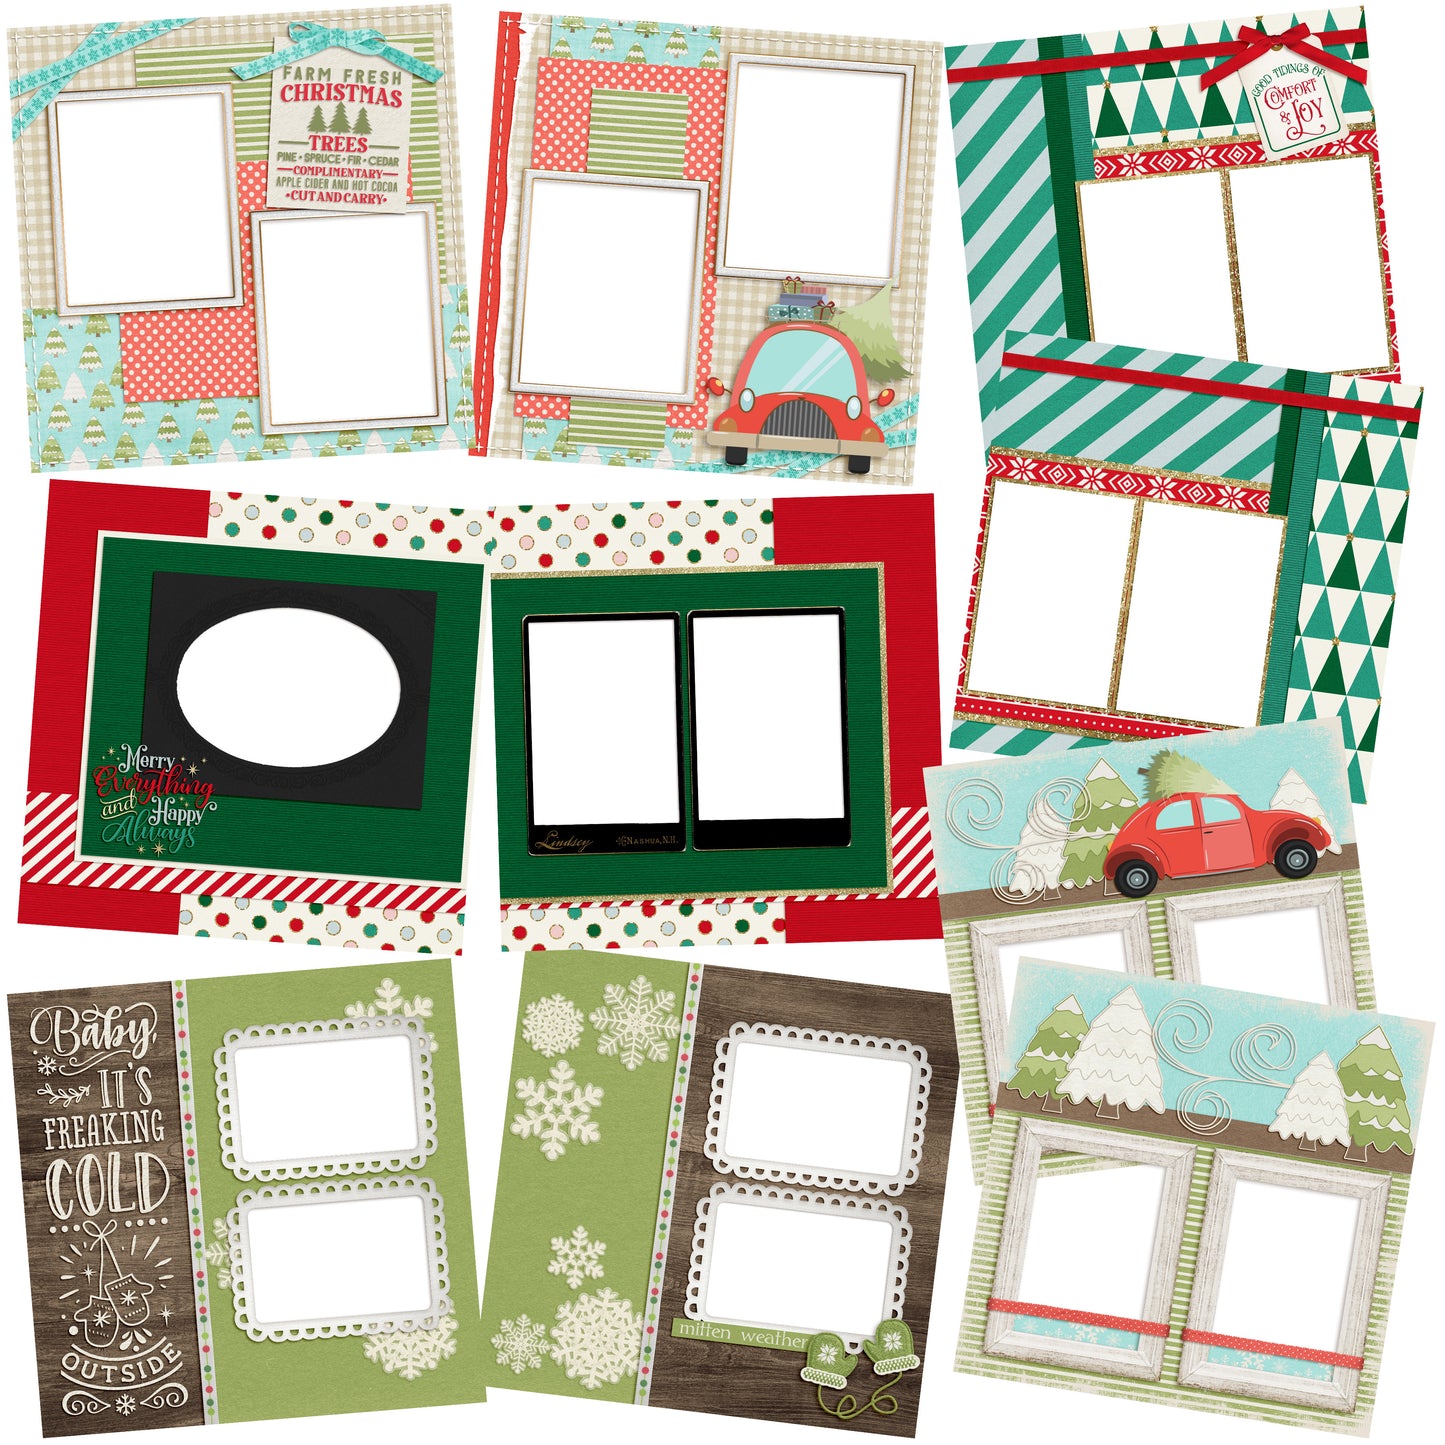 Merry Everything - Christmas EZ Quick Pages -  Digital Bundle - 10 Digital Scrapbook Pages - INSTANT DOWNLOAD